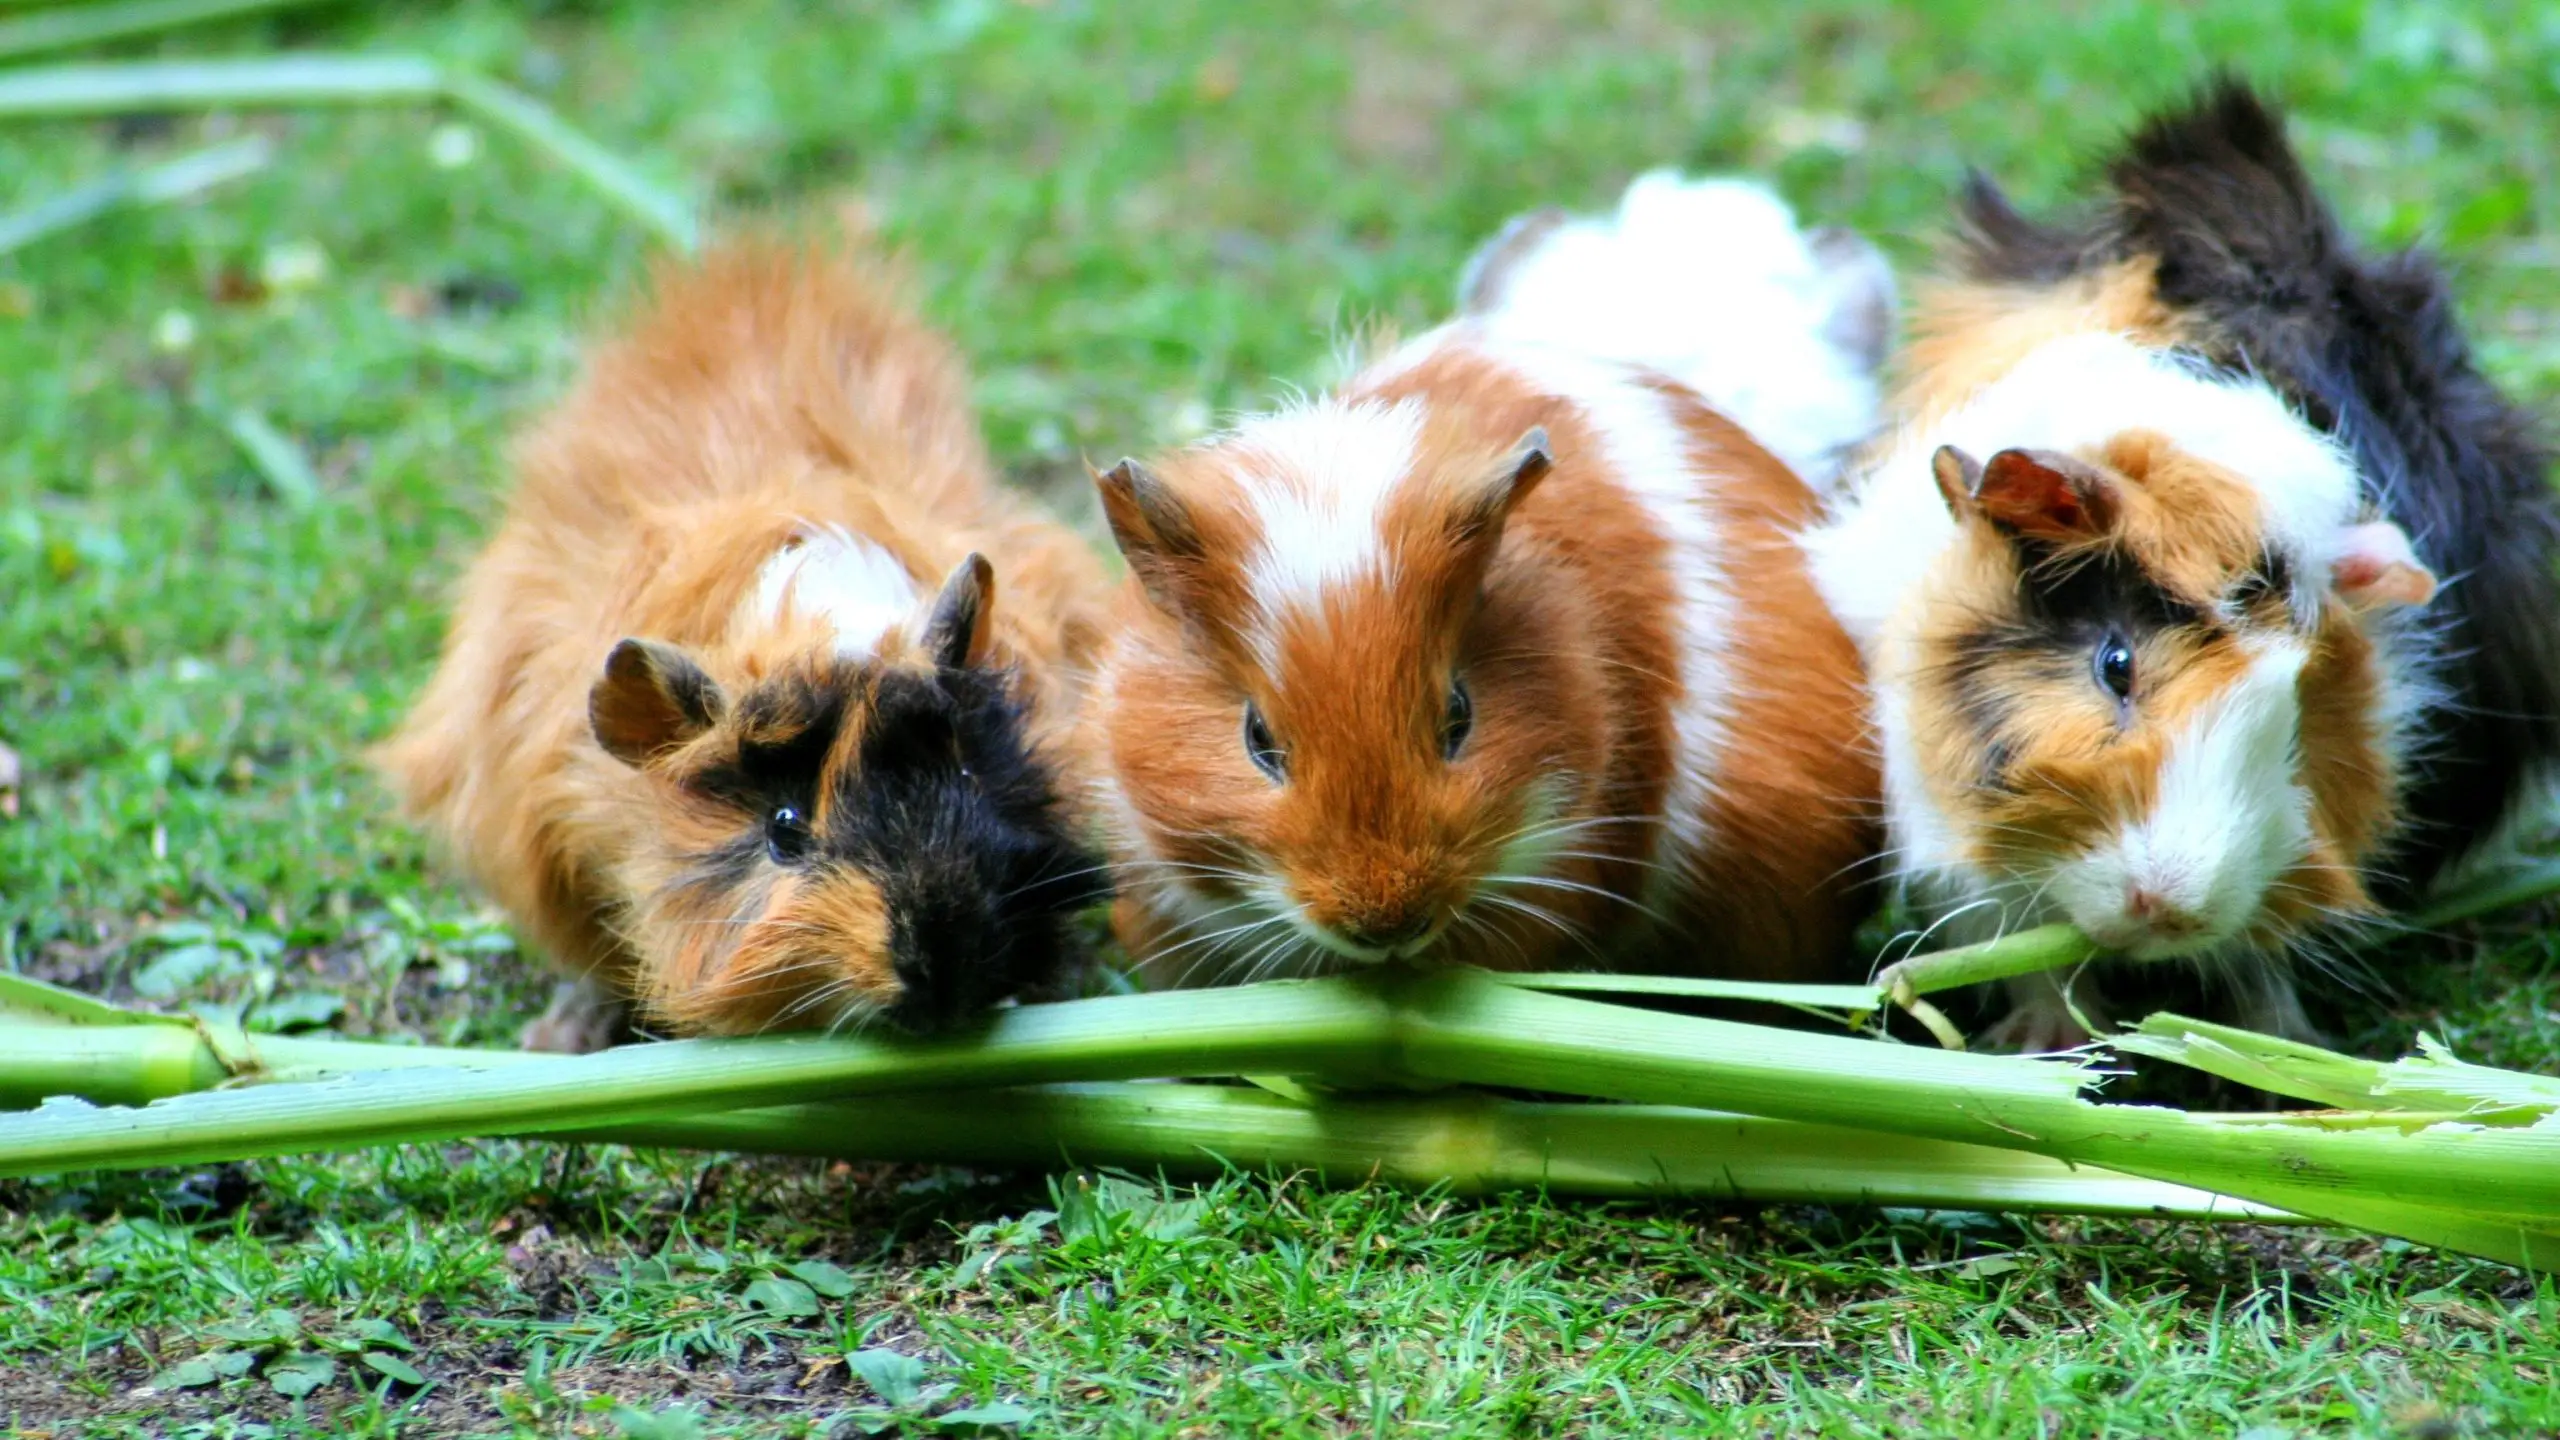 3 Female guinea pigs eating together.